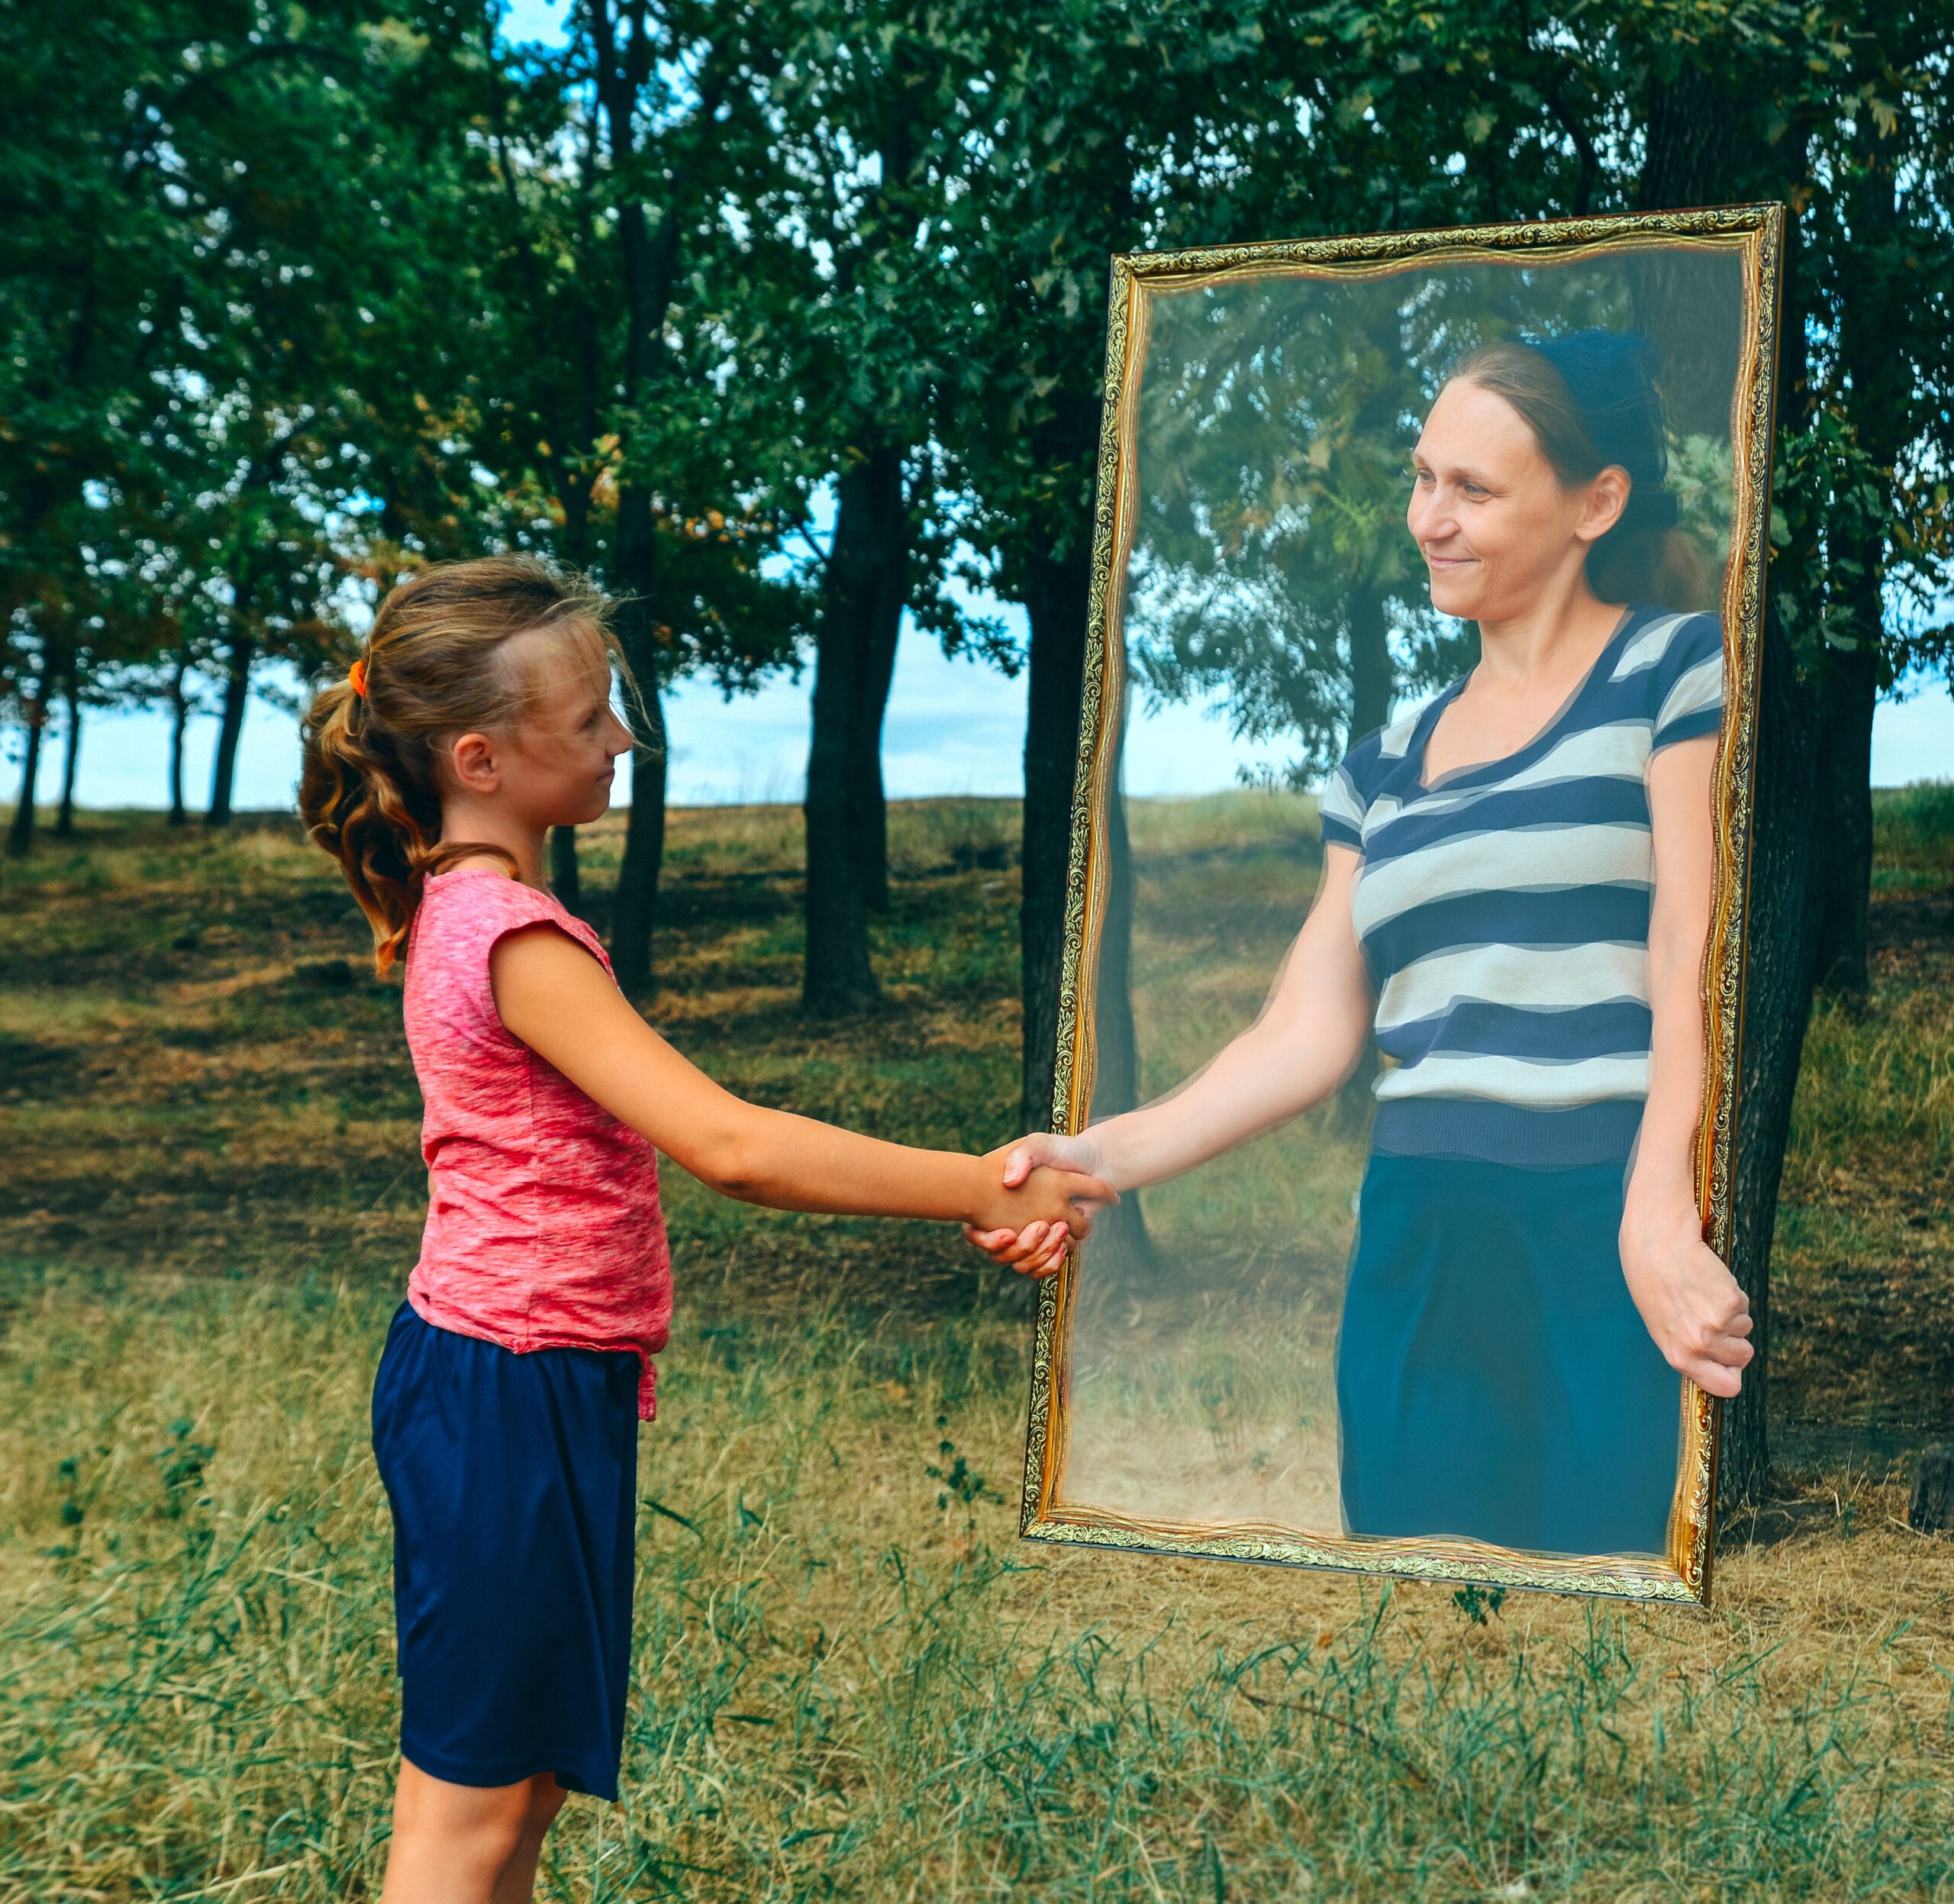 An image of a person inside a mirror, reaching out to shake hands with a person standing in a field with trees. They are clearly different people but both share a similar gender presentation.